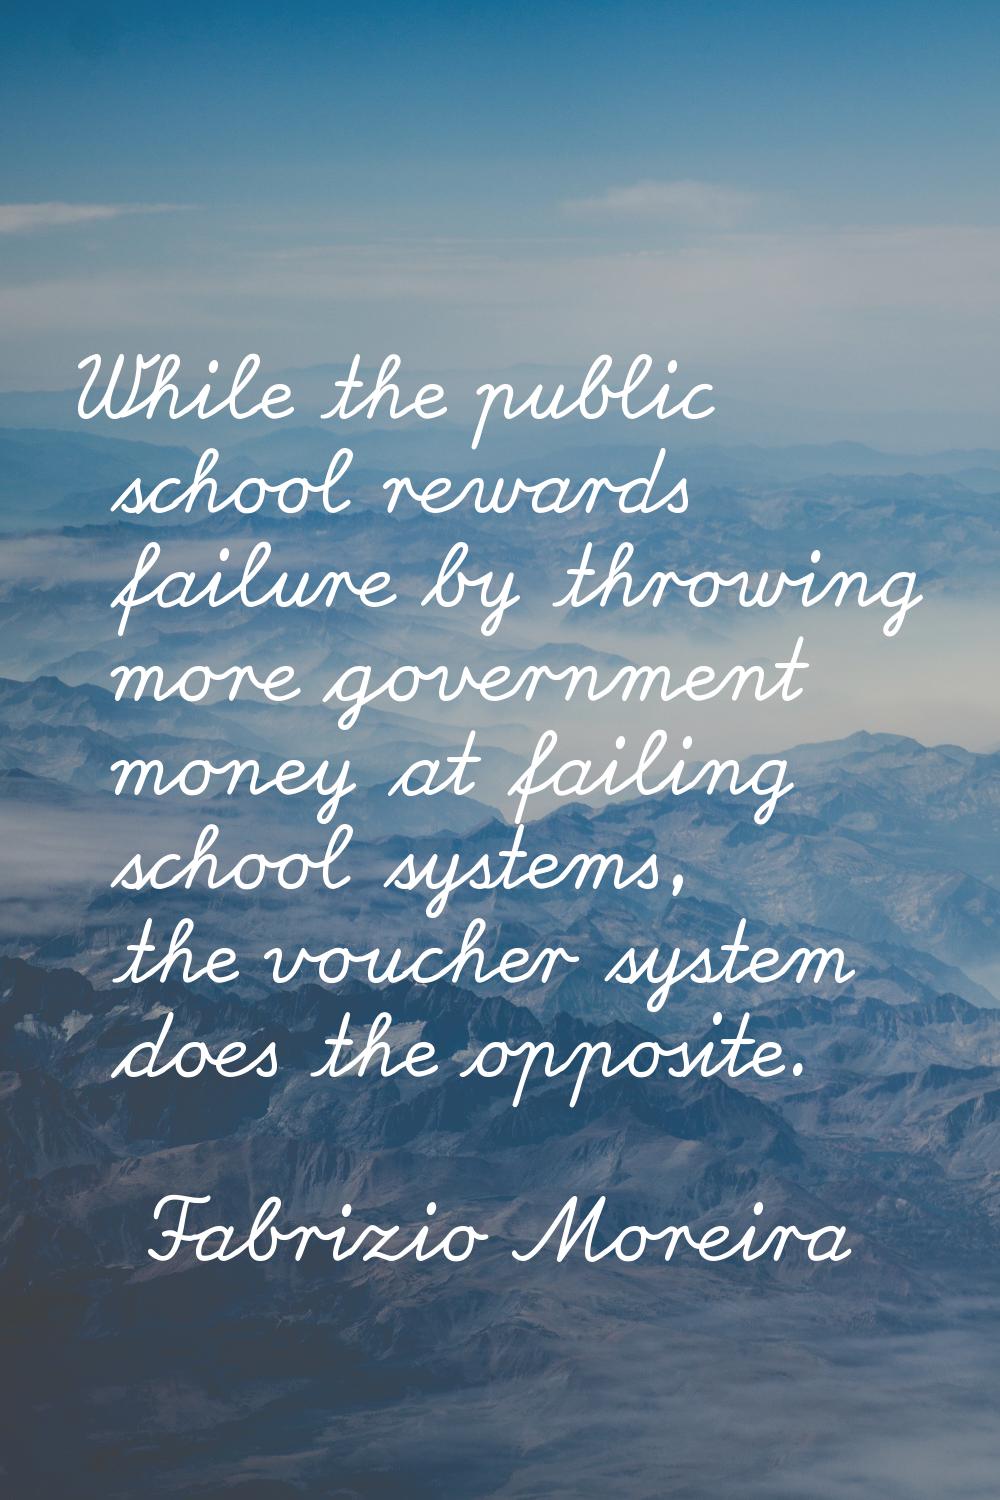 While the public school rewards failure by throwing more government money at failing school systems